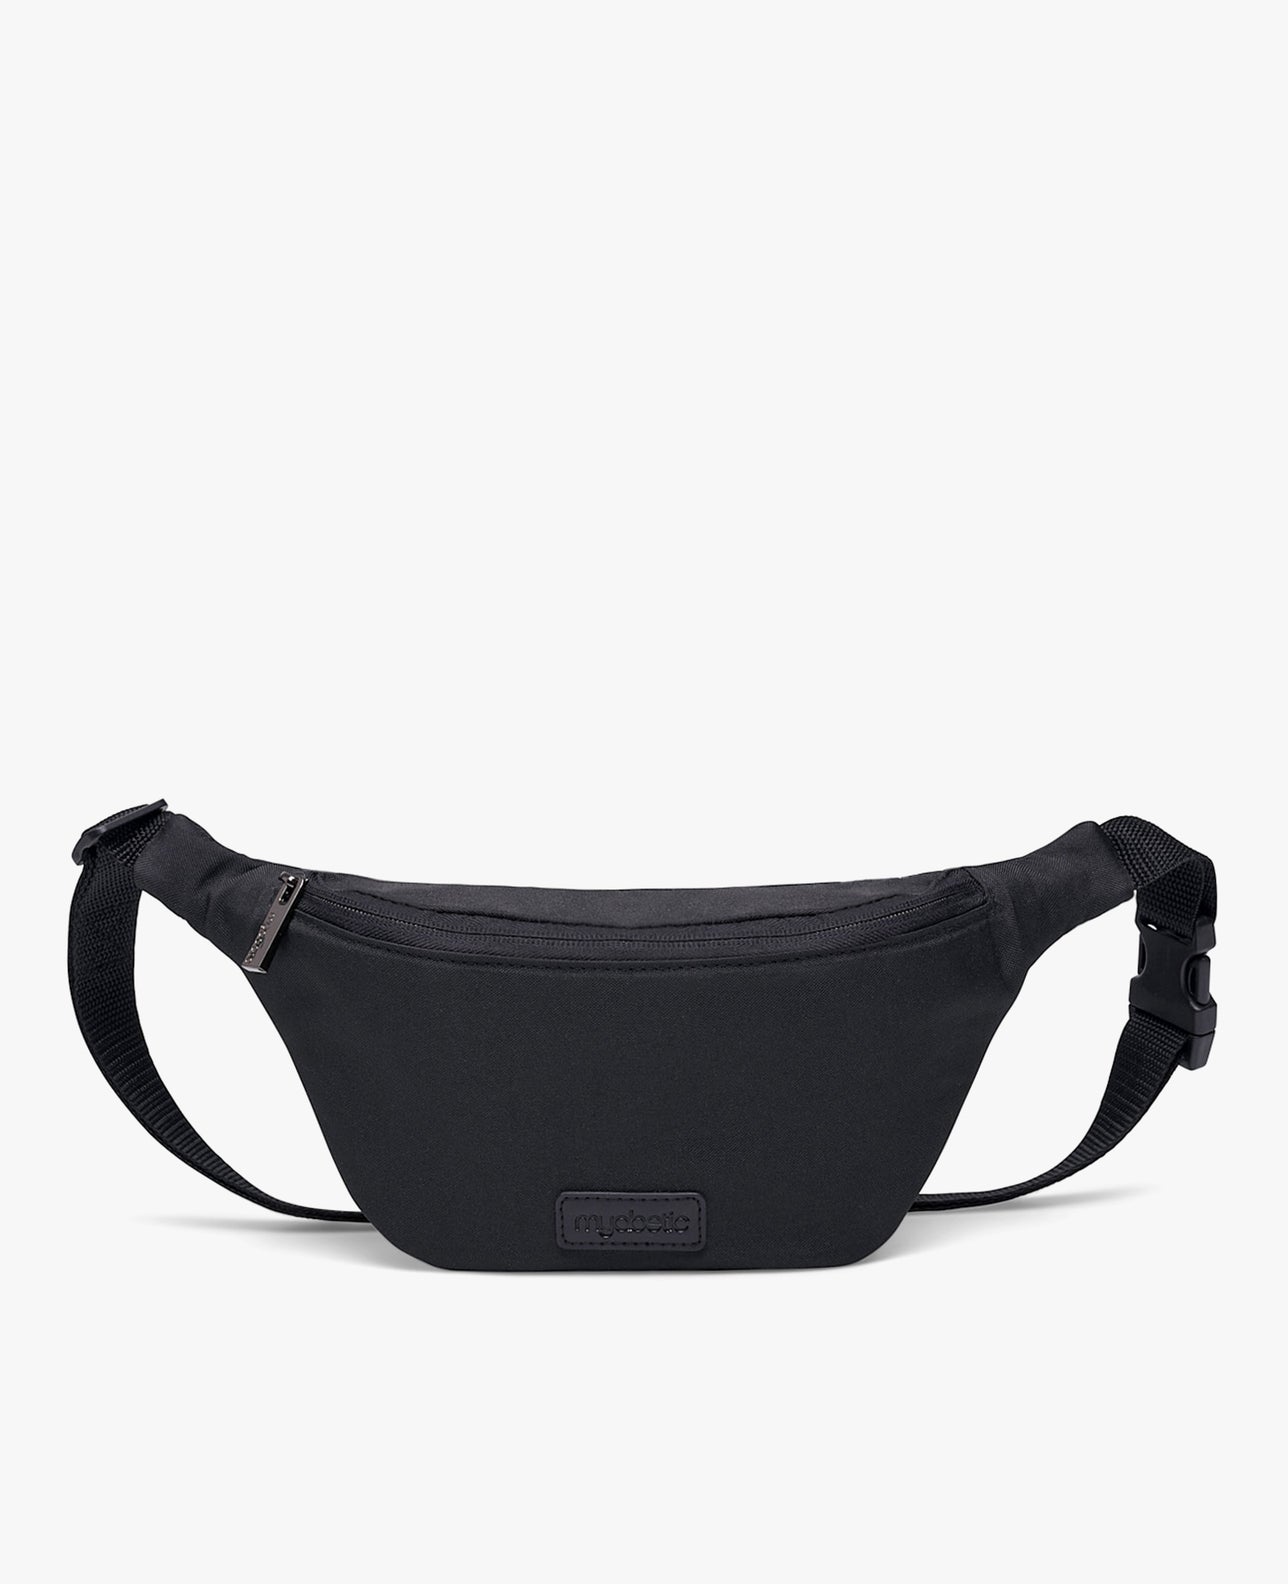 where to purchase a fanny pack